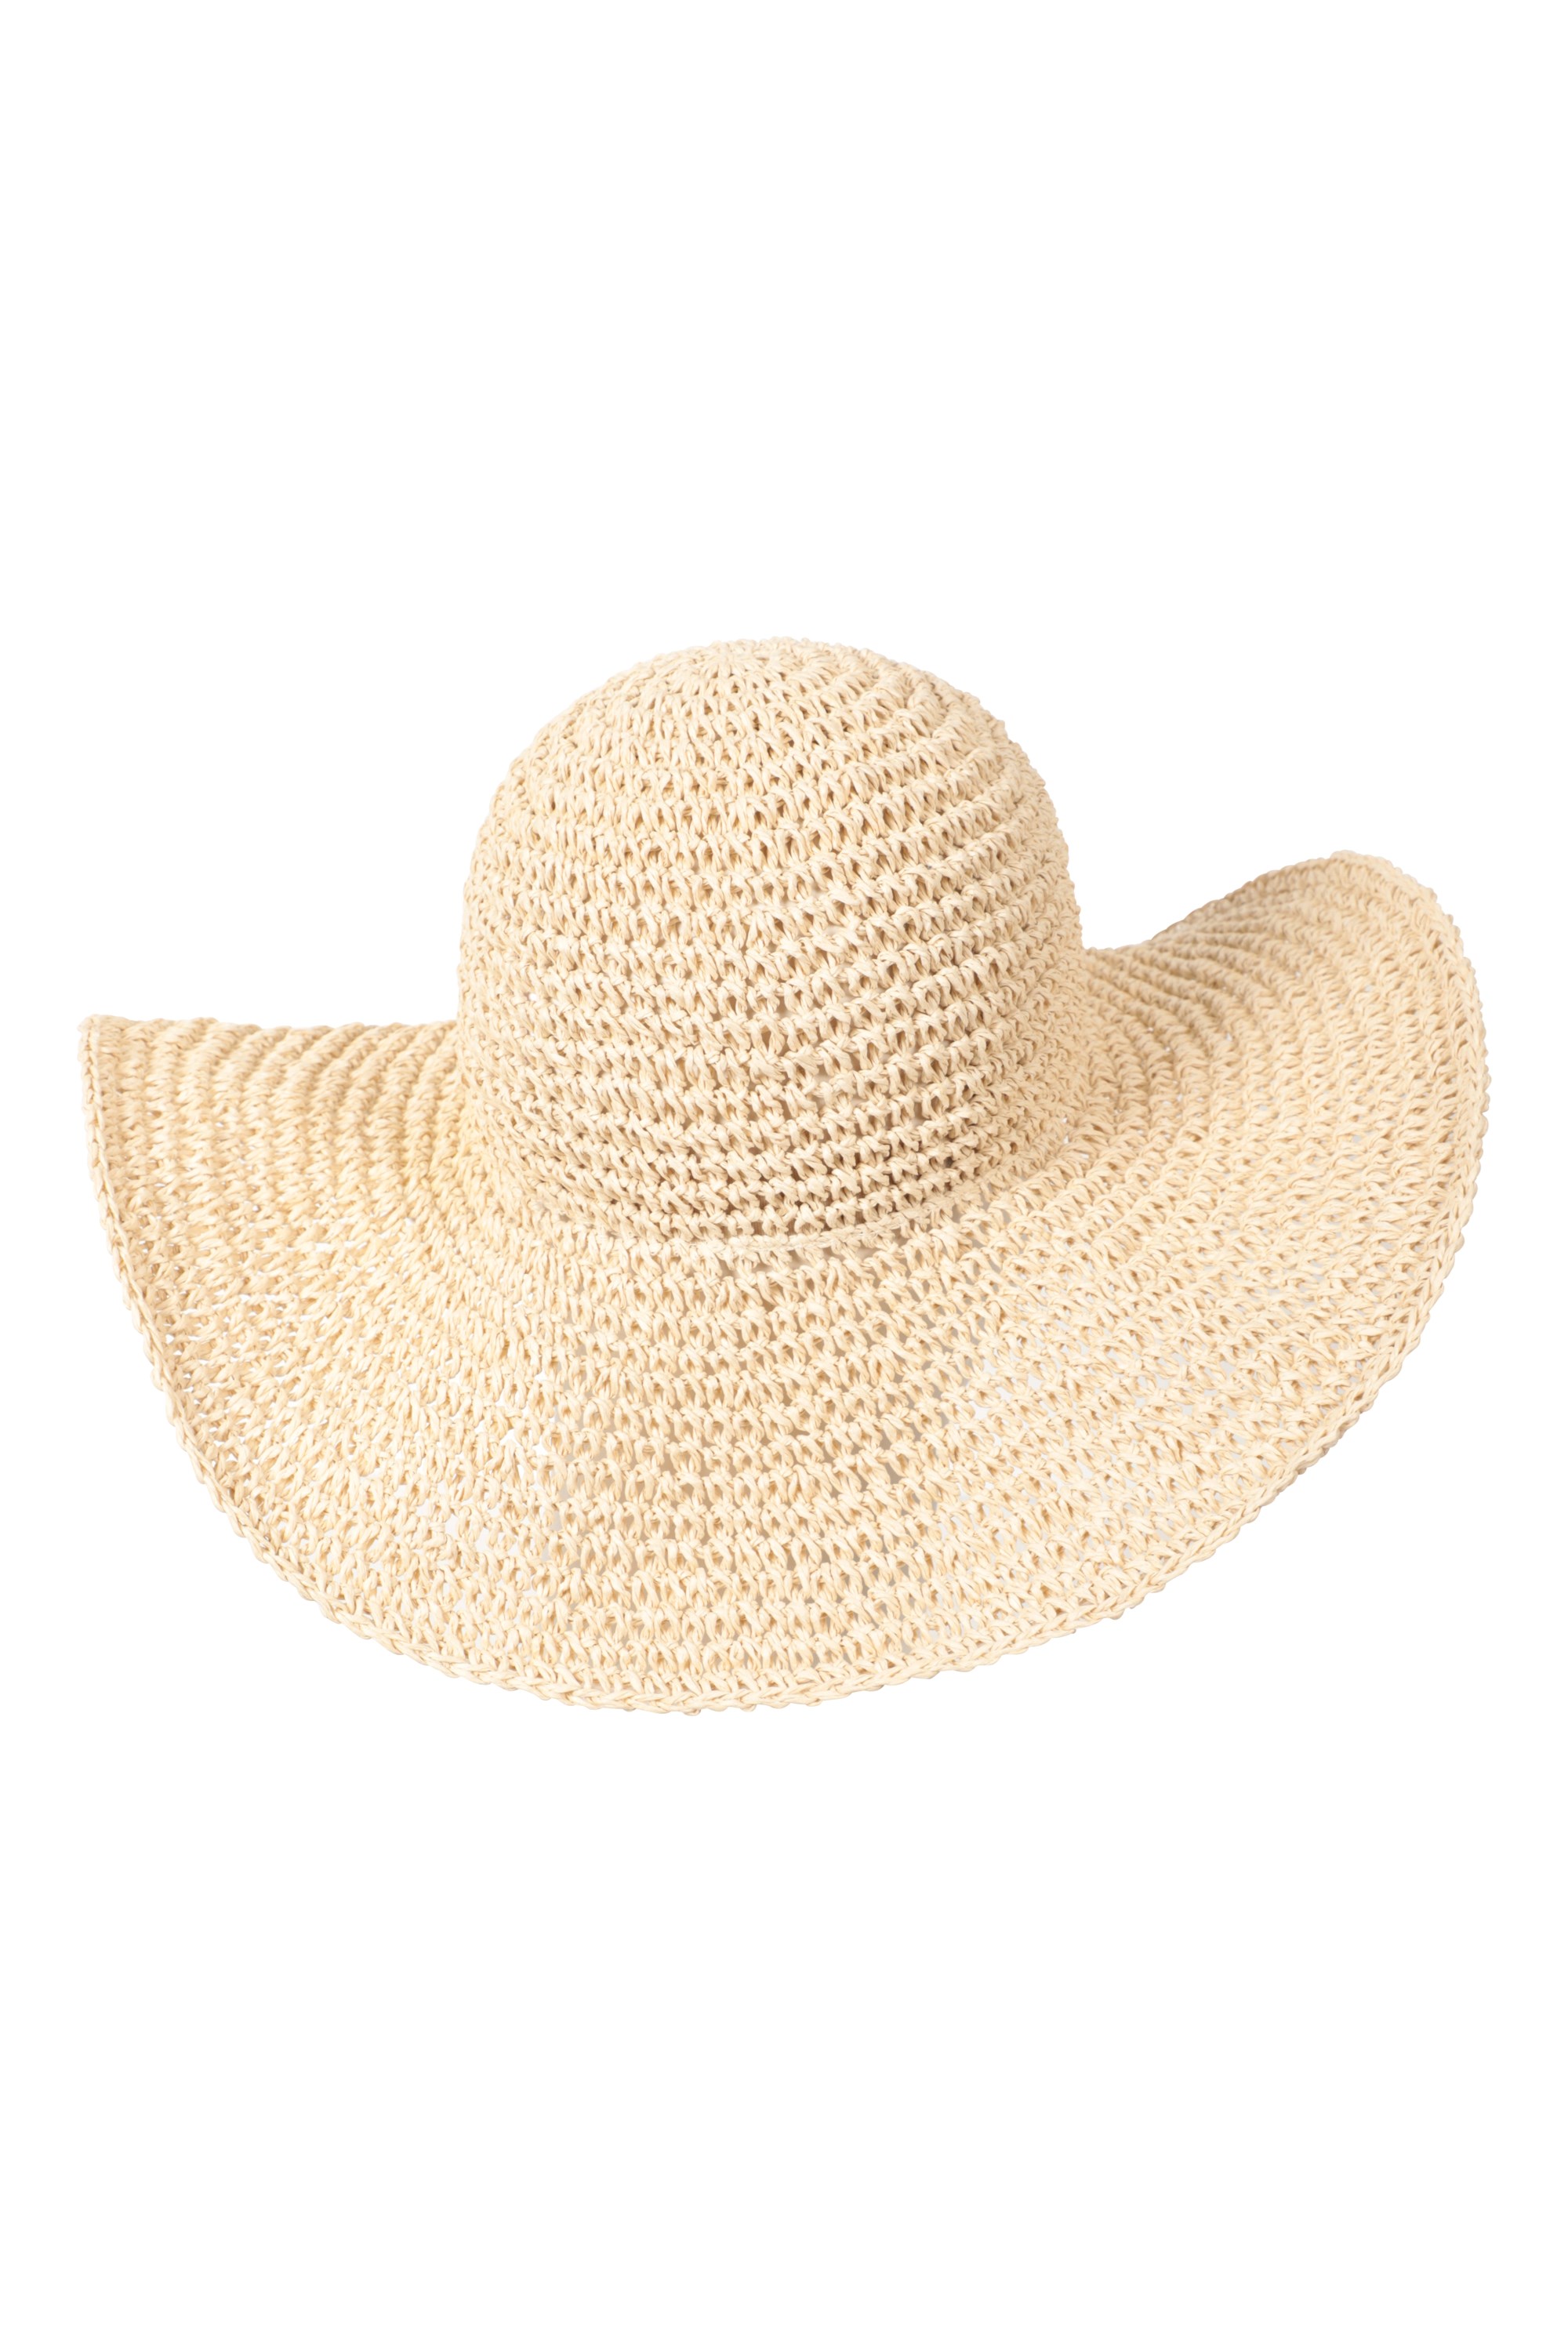 Summer Hat for Women, Sun-protection Off-white Wide Brim Hat, Casual Beach  Hat, Crushable Packable Travel Hat 